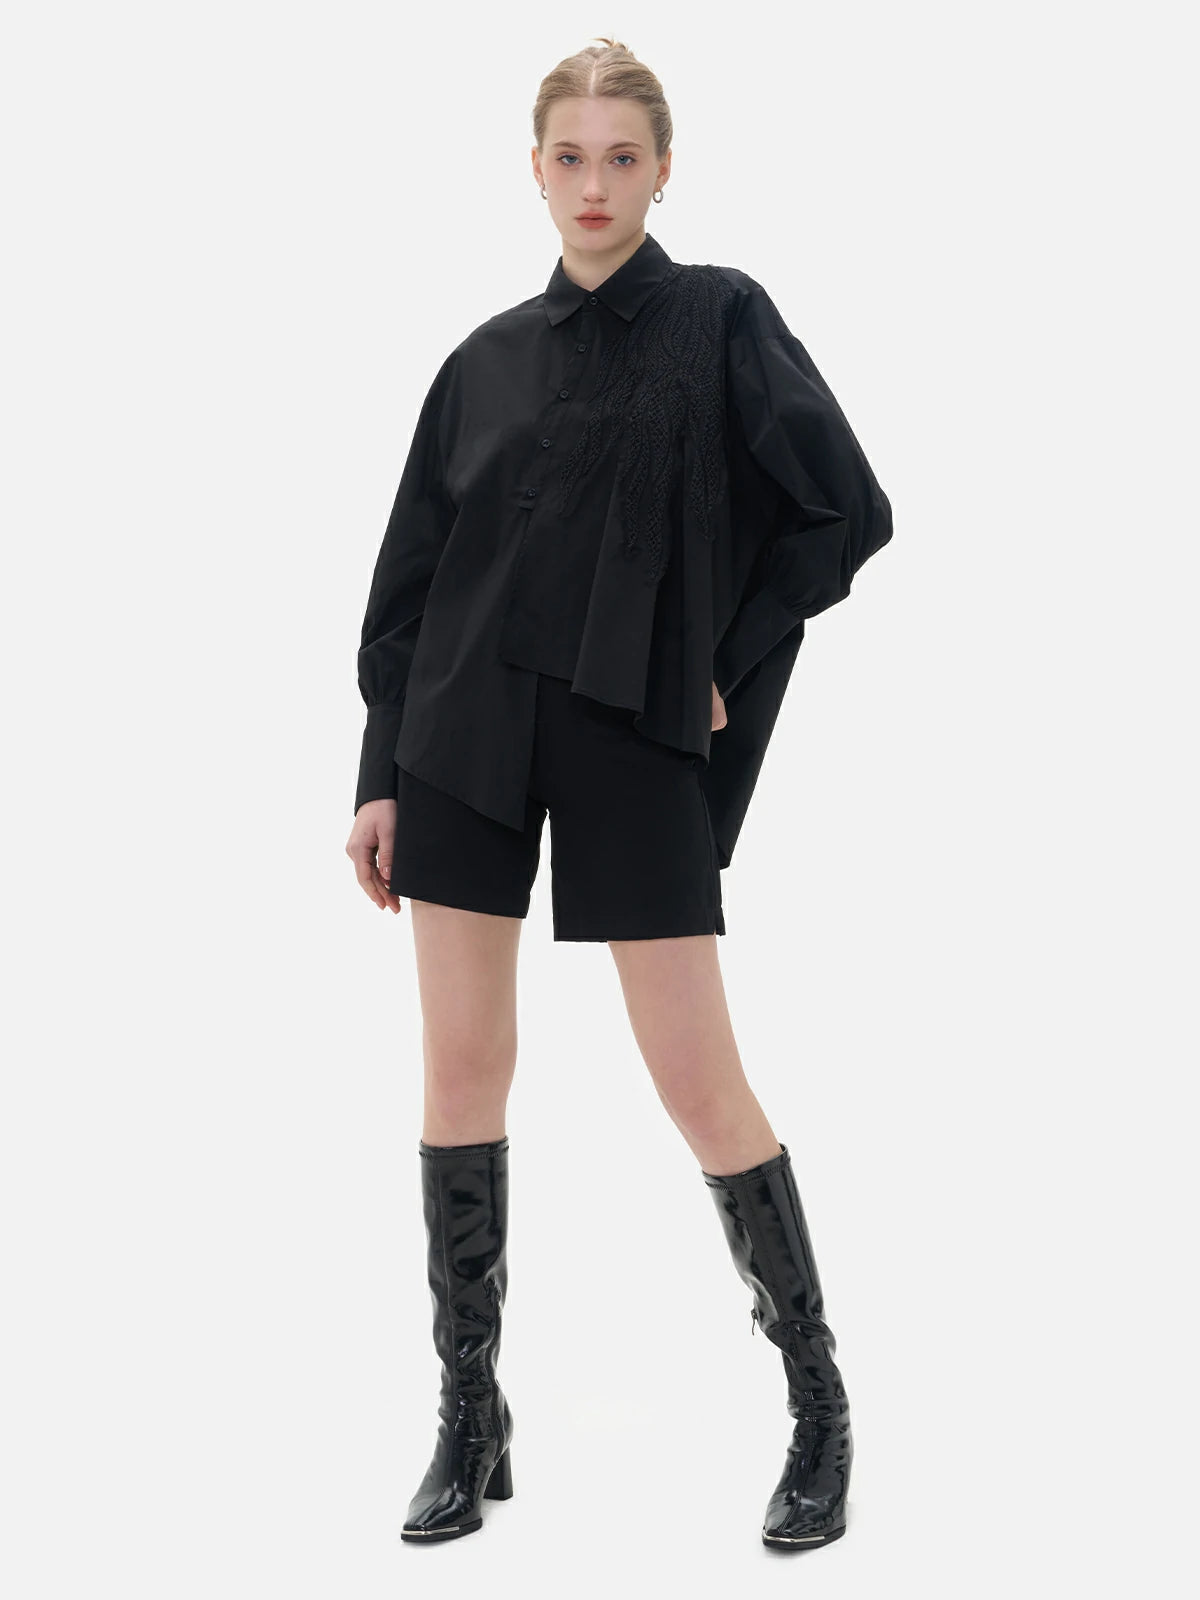 Stylish black shirt with distinctive features, including front irregular cut, back slit, and diagonal button closure.